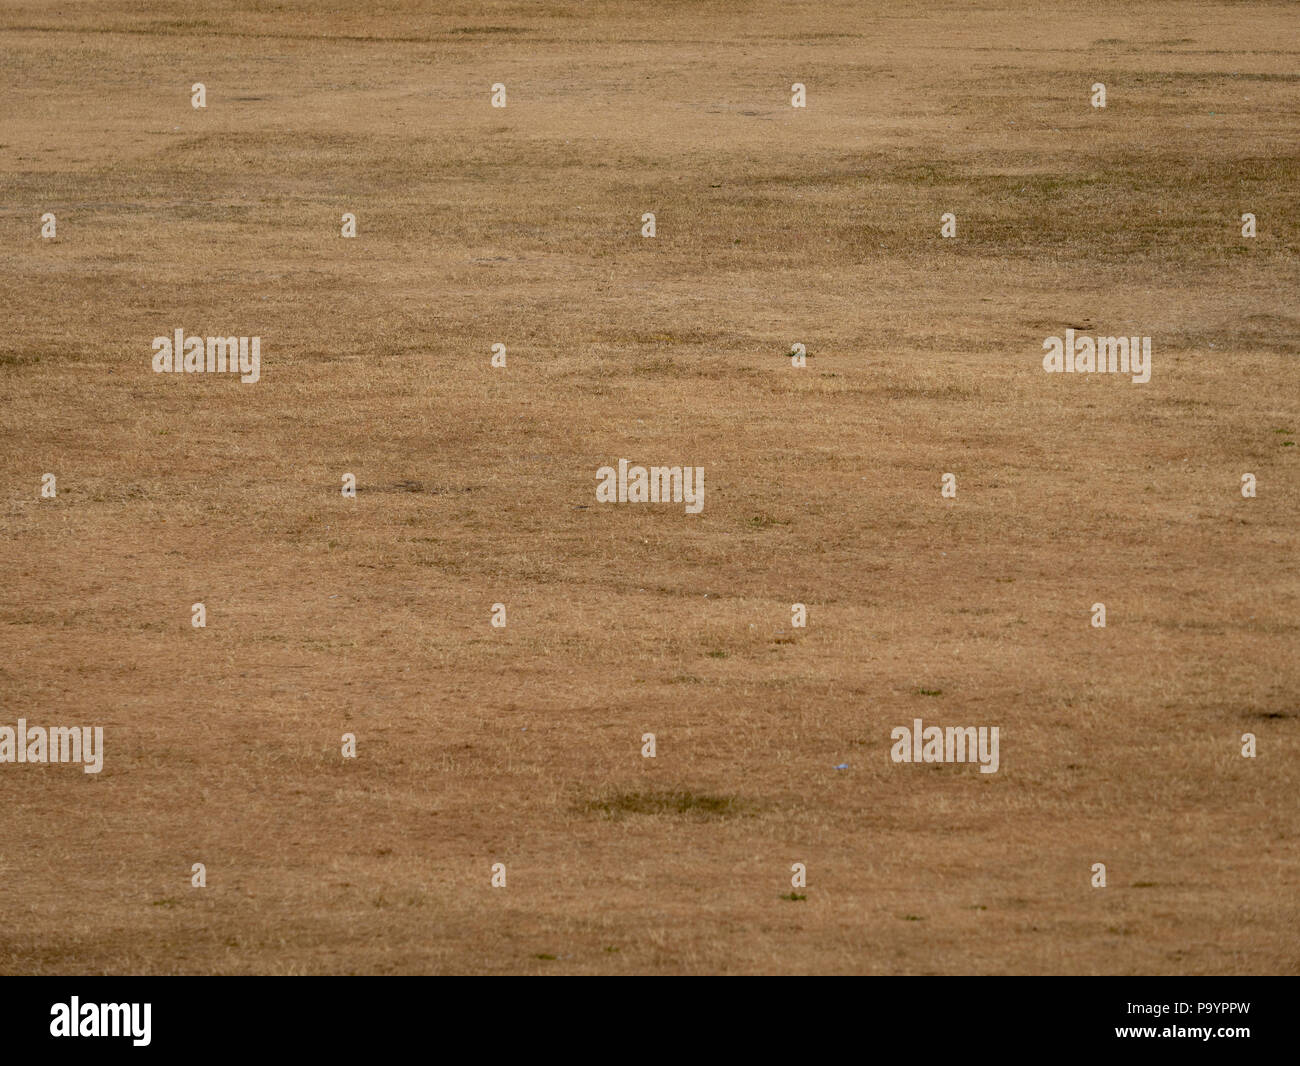 Dry brown grass field in a public park due to extreme hot weather Stock Photo